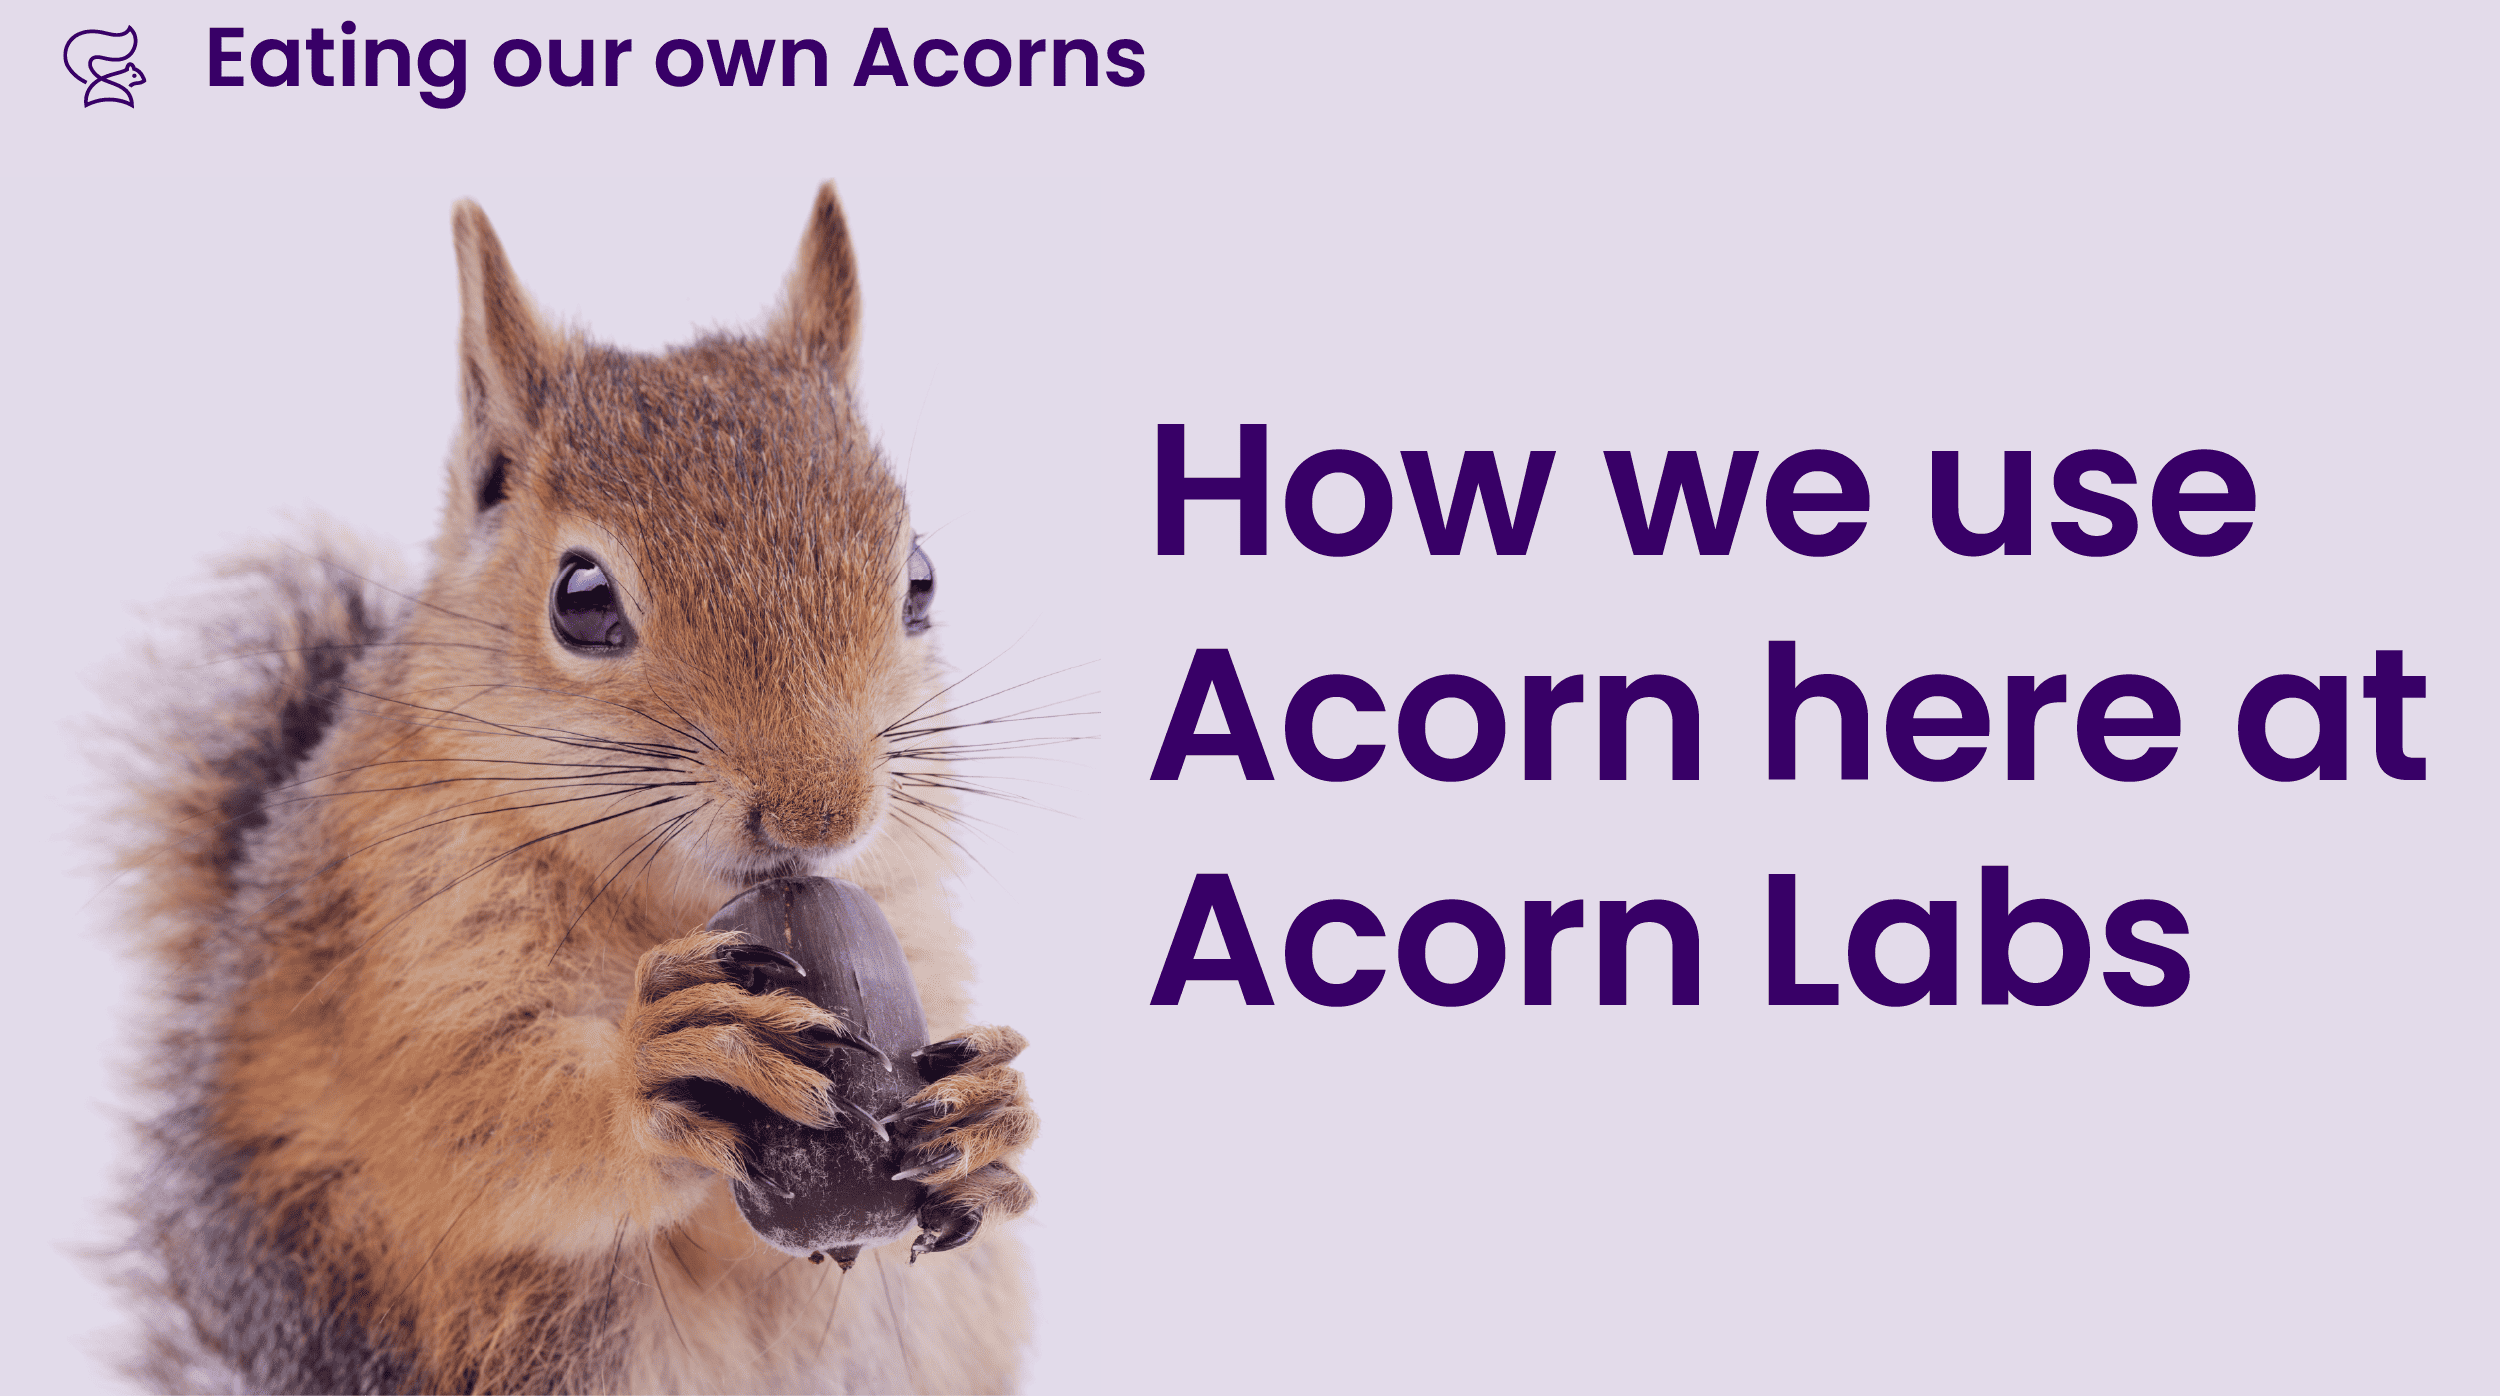 How we’re using Acorn here at Acorn Labs